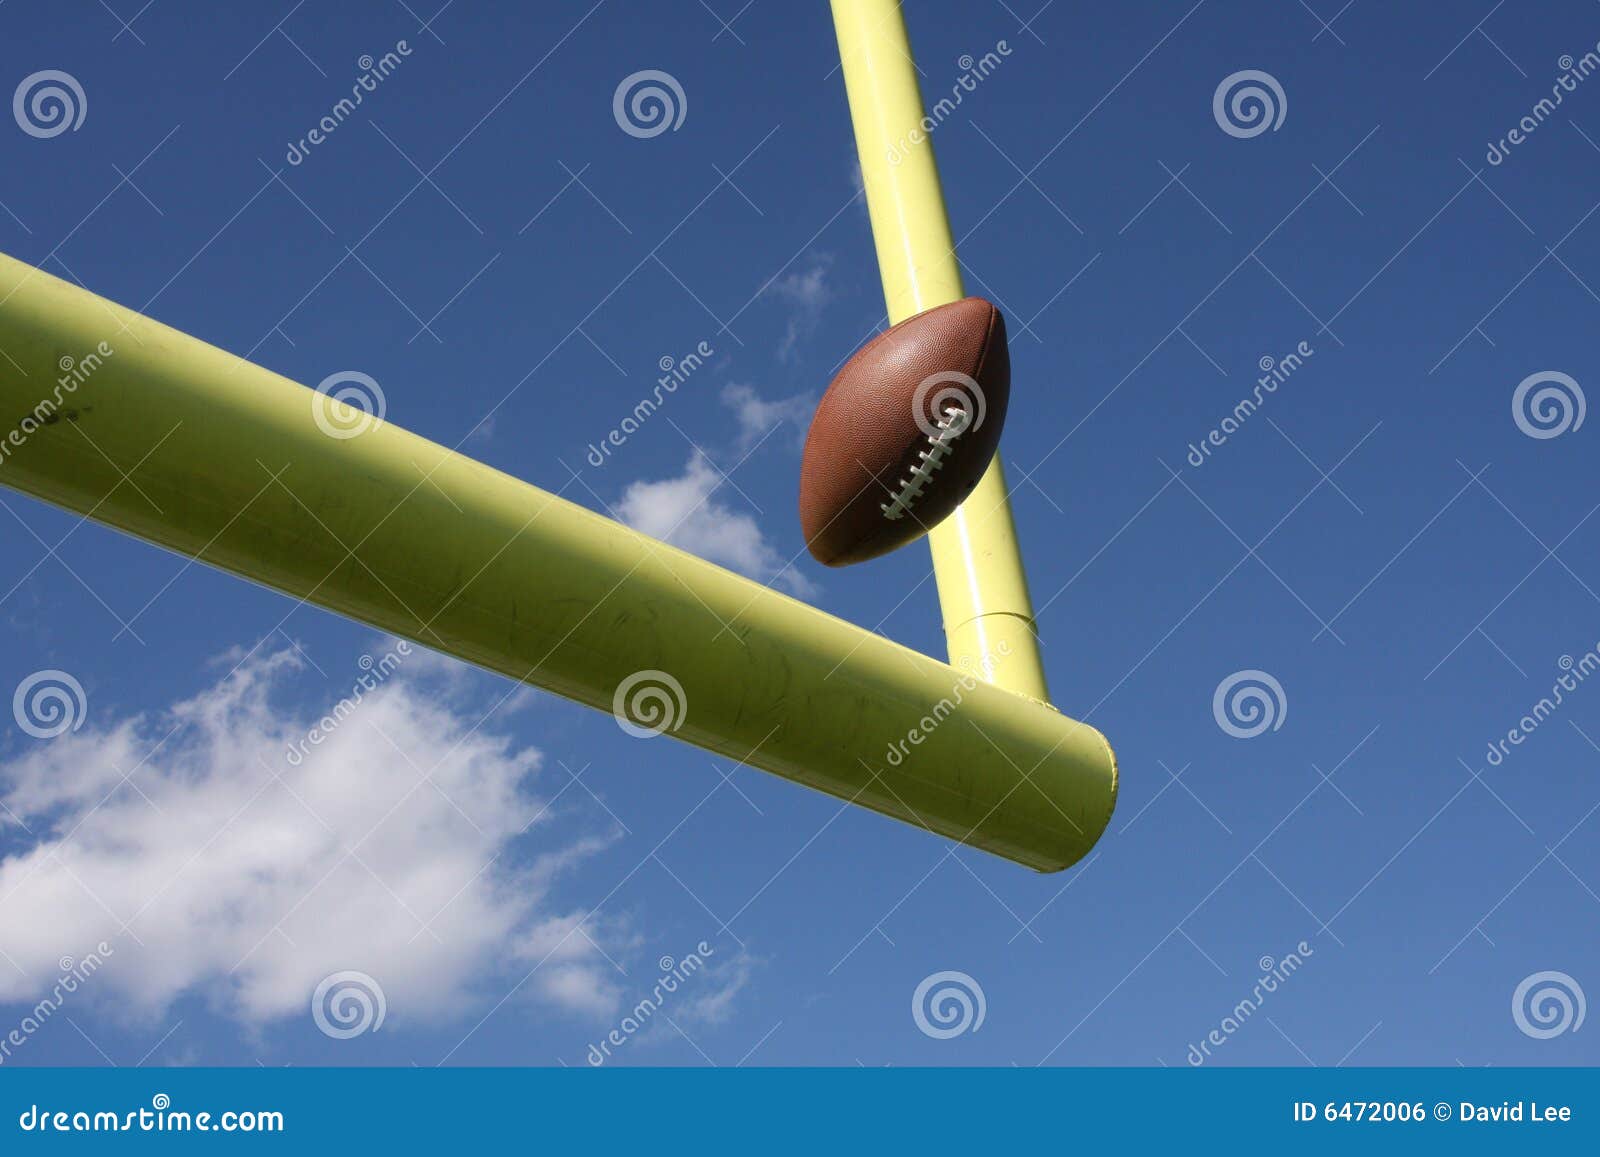 football kicked through the uprights